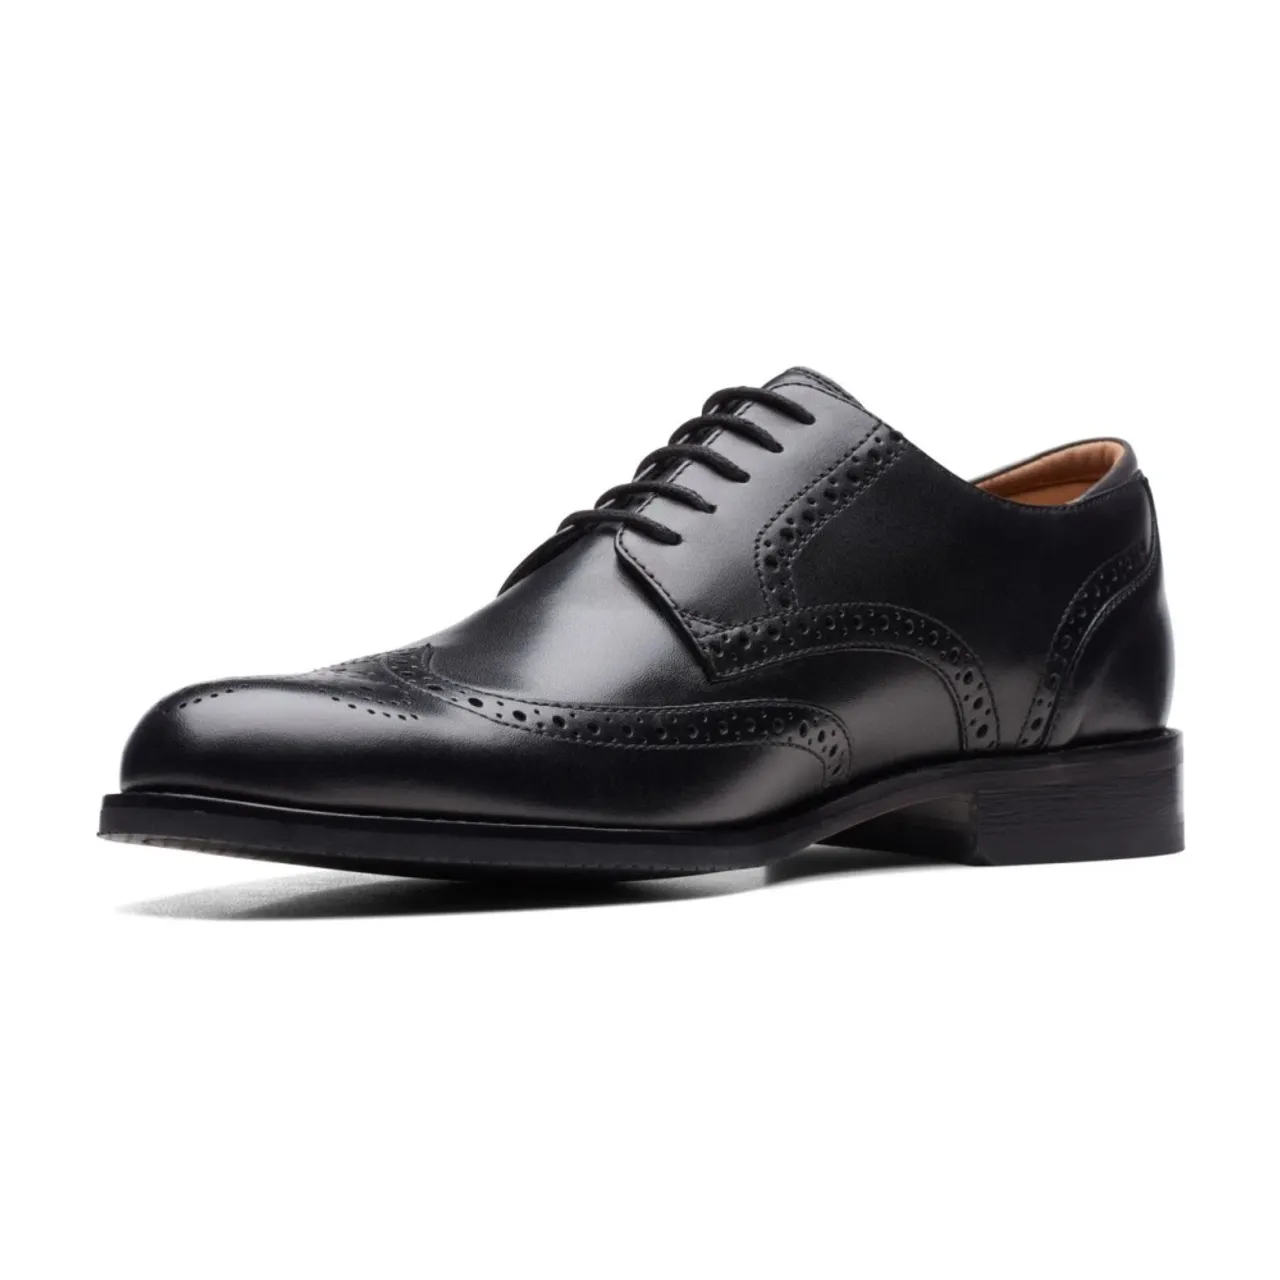 Clarks , Formal Business Shoes in Black ,Black male, Sizes: